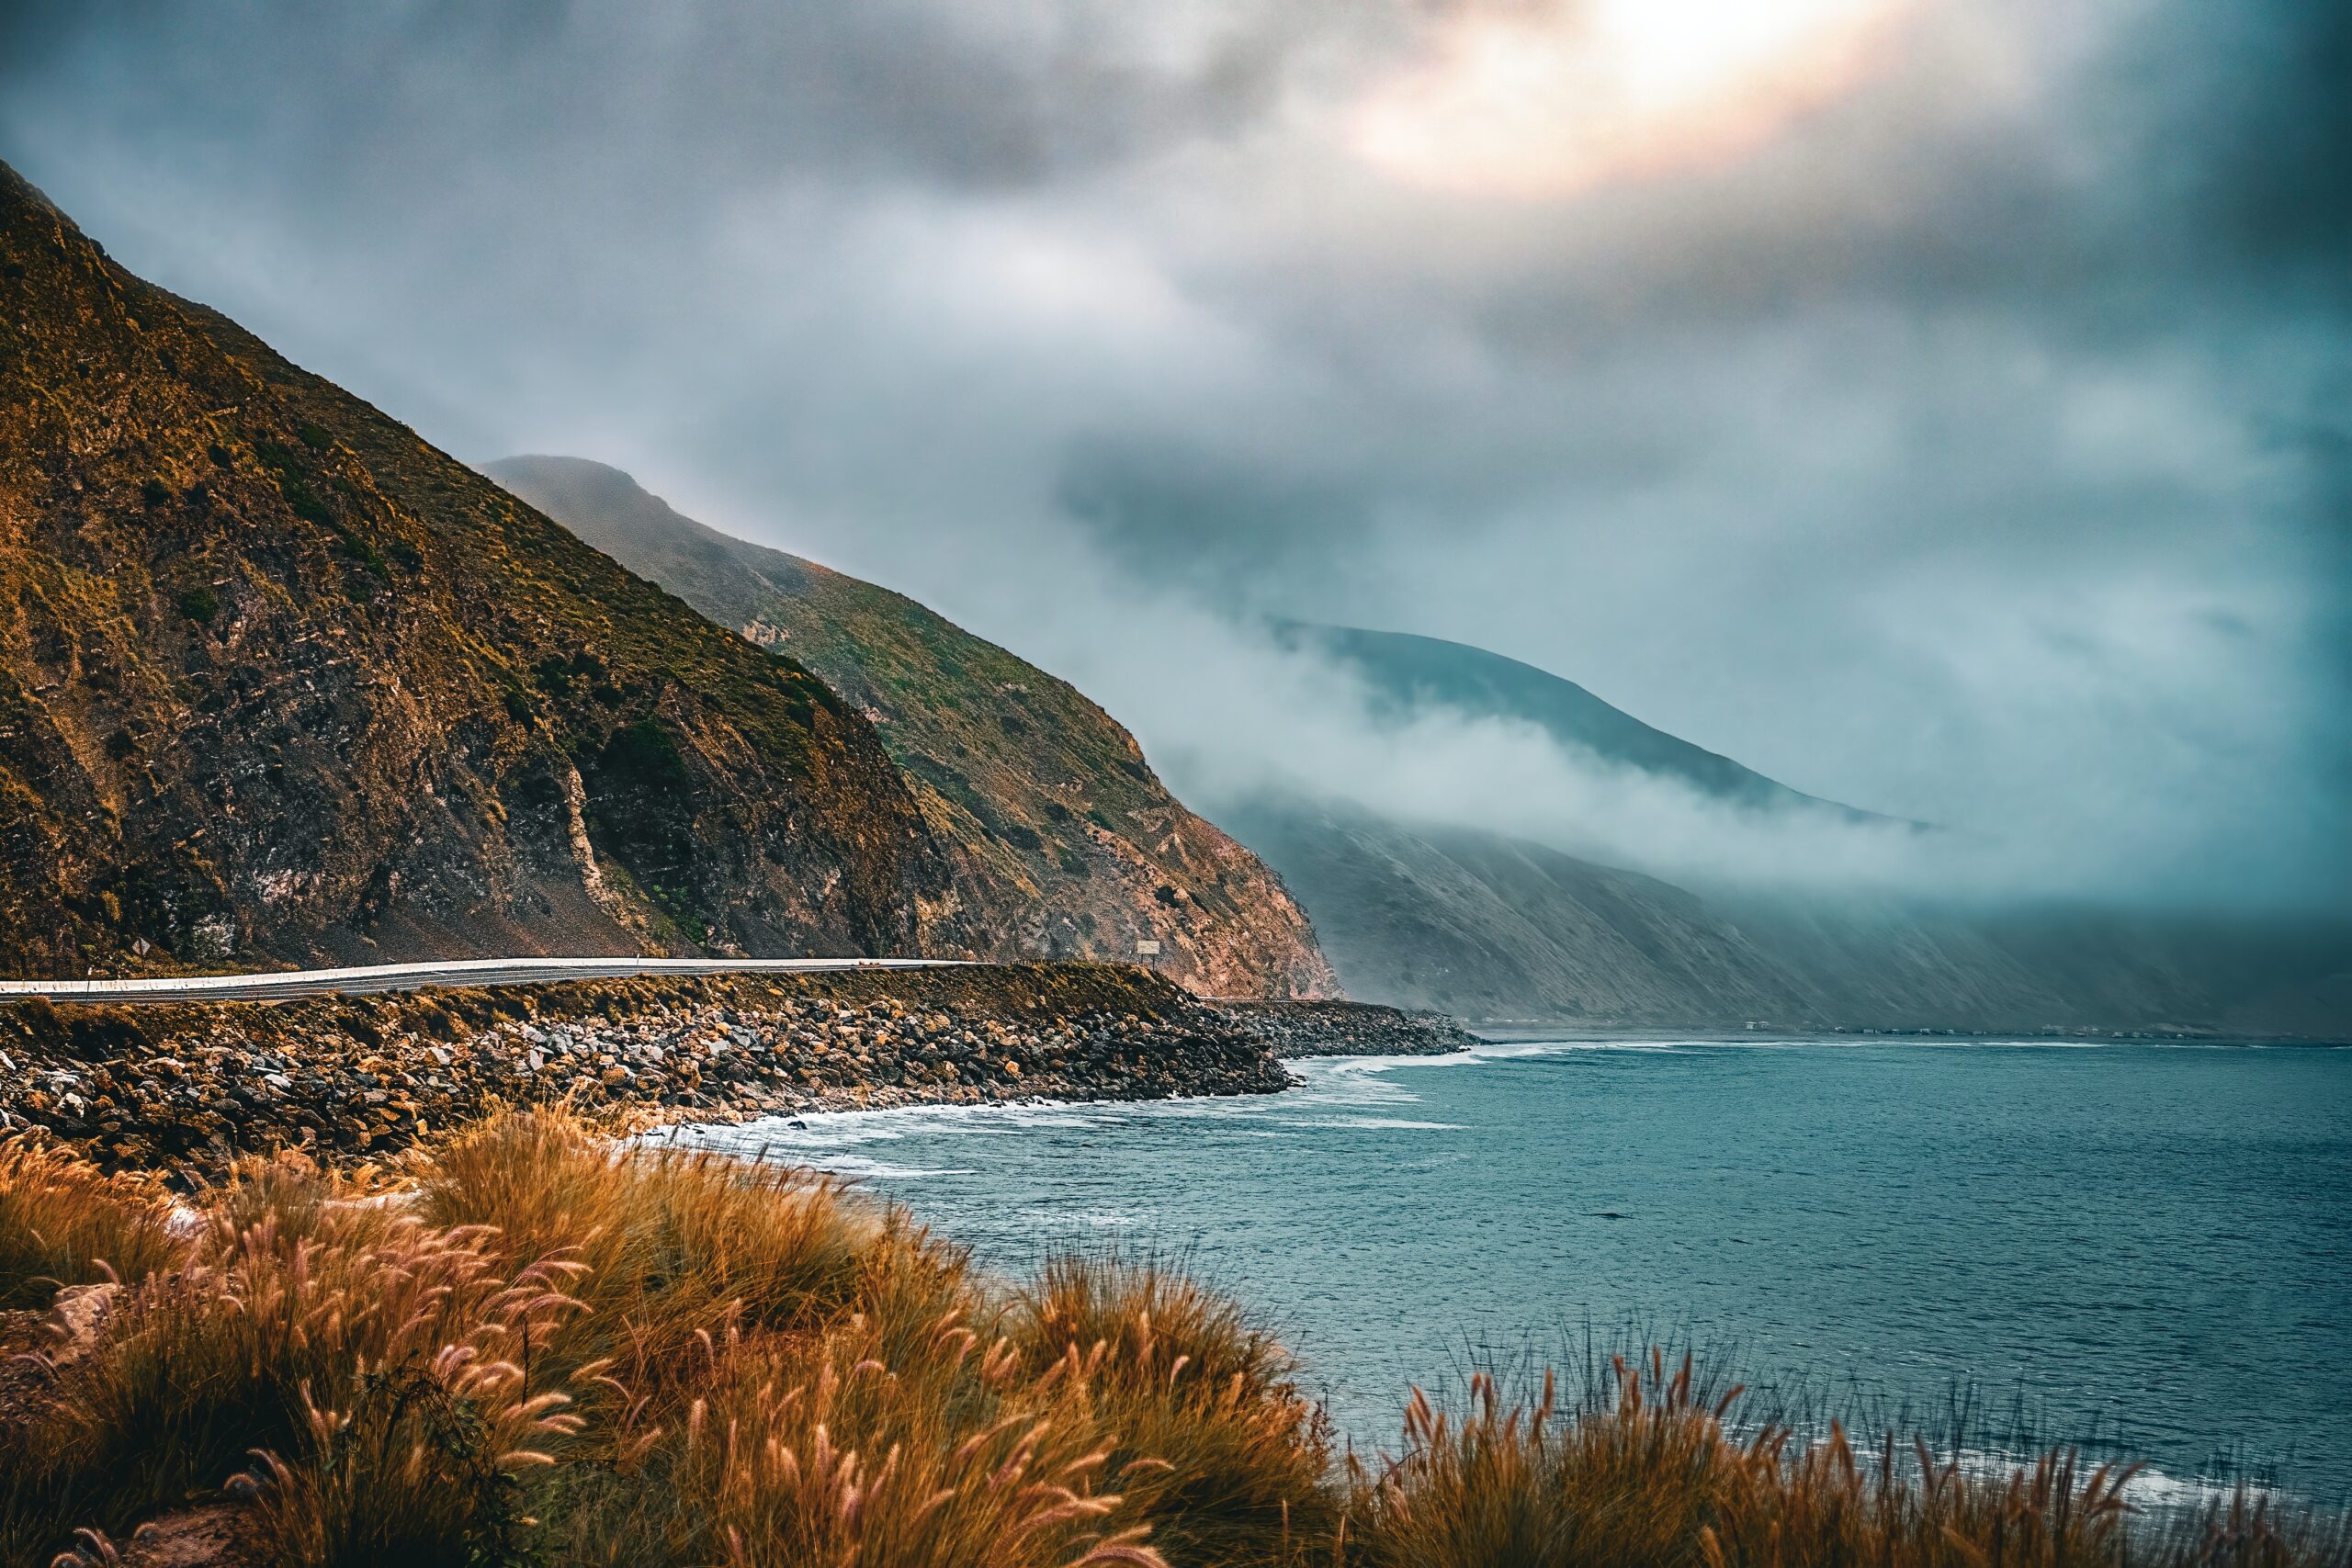 California's Point Mugu was an important filming location for the second Top Gun film.
pictured: The edge of a mountain in Point Mugu State Park and the tranquil coastal waters of the beach